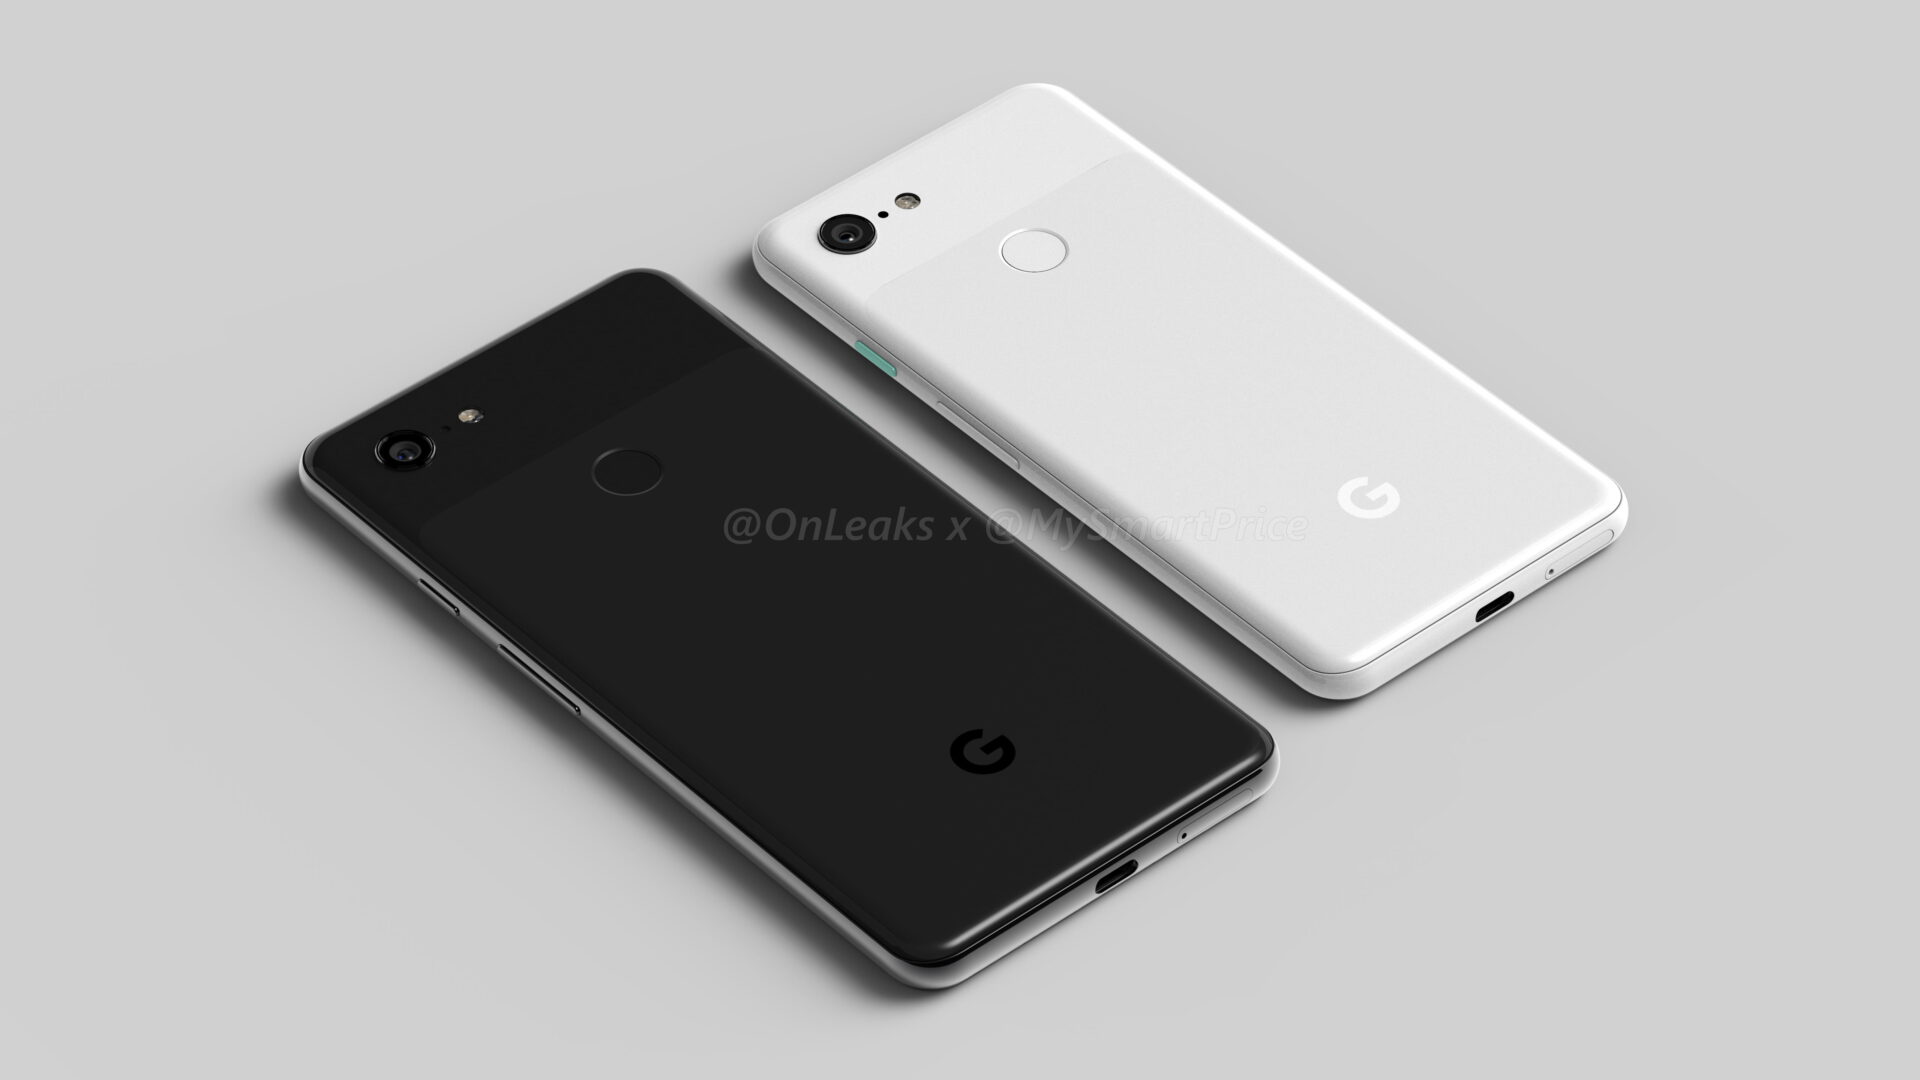 Latest leaks on Google Pixel 3 XL reveals its glass back and white color variant